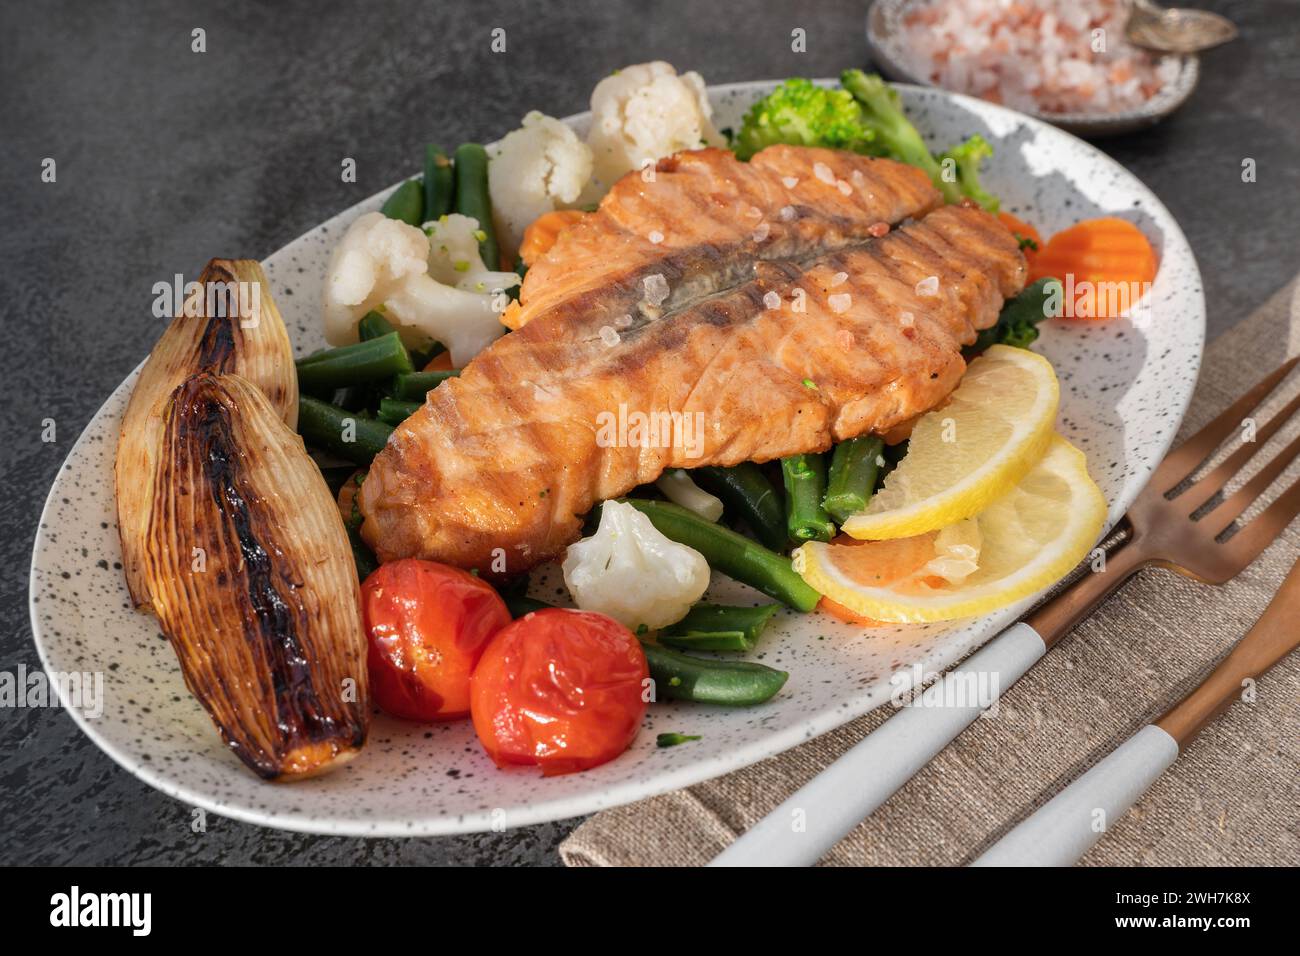 Grilled salmon steak with vegetables - cauliflower and broccoli, tomatoes and shallots. Healthy eating concept. Close-up Stock Photo